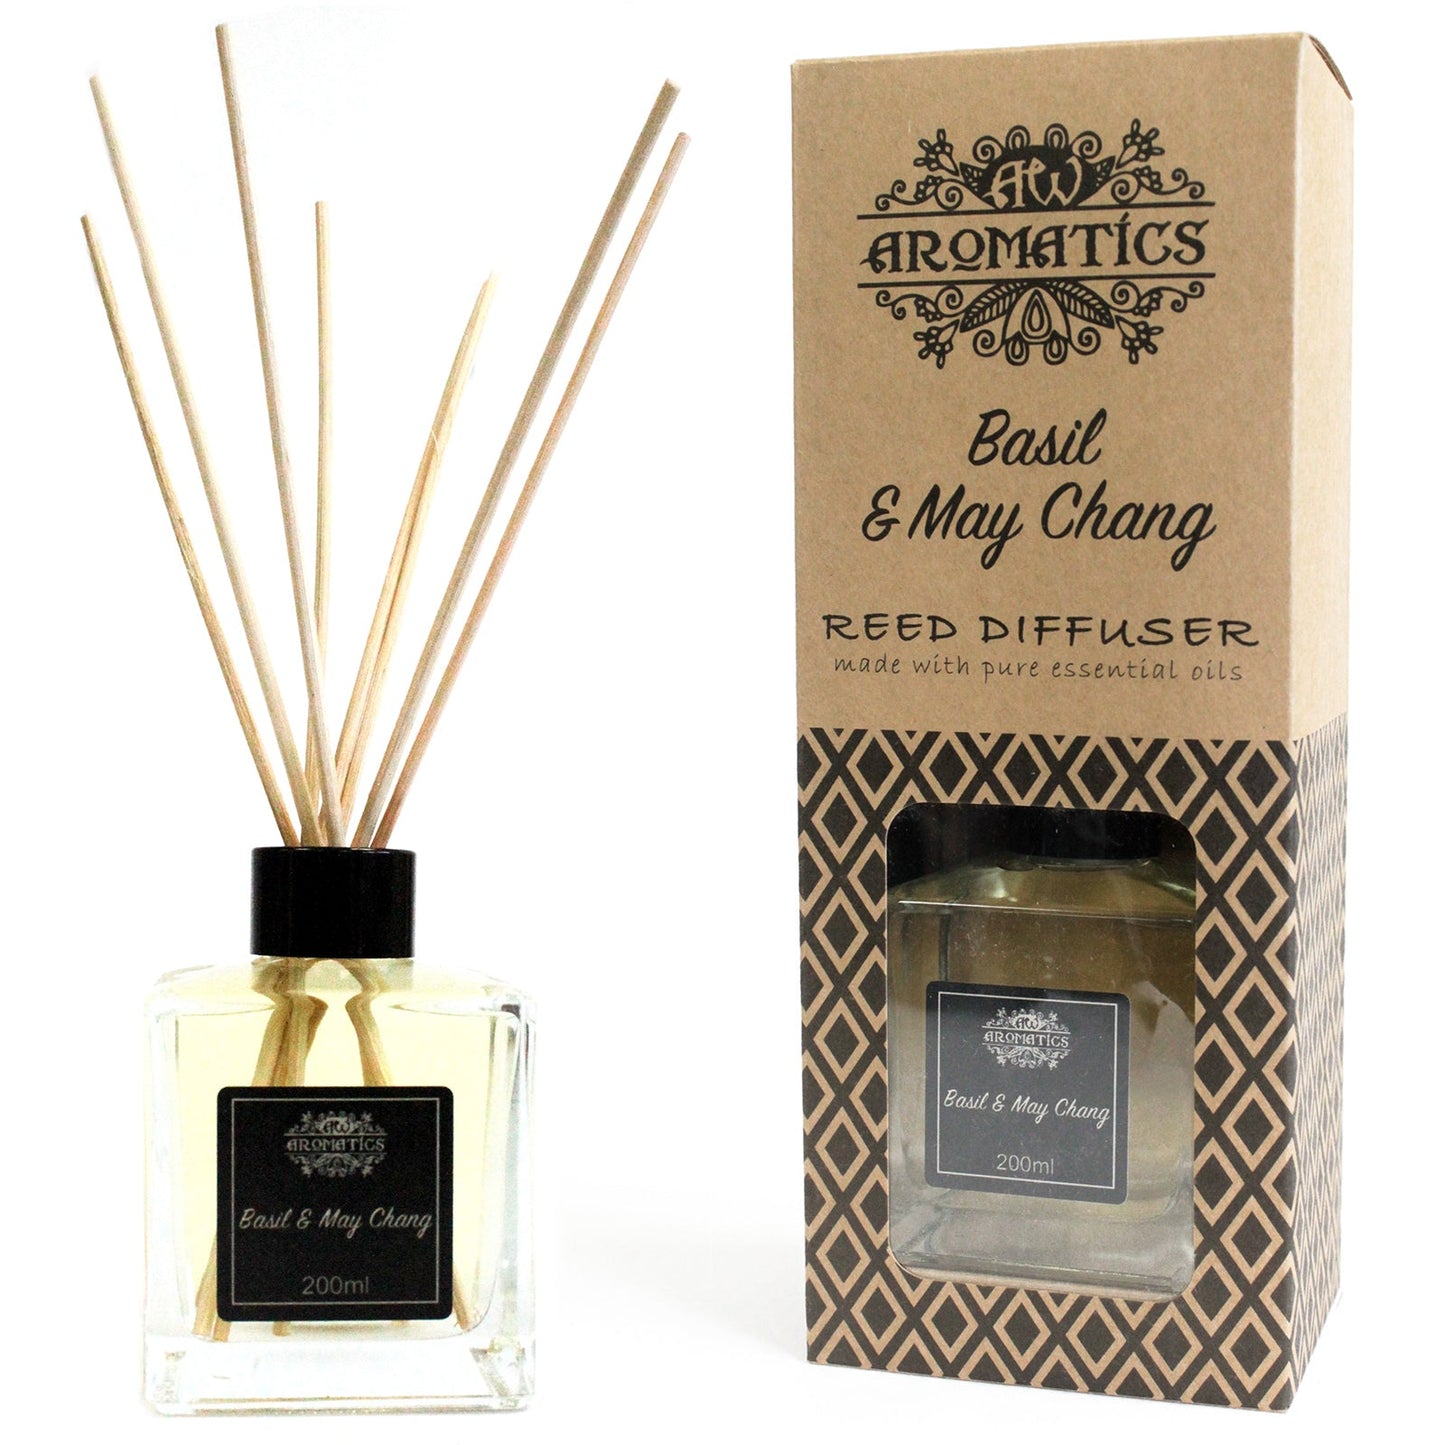 Luxury Essential Oils Reed Diffuser - Various Blends Pure Essential Oils Reed Diffusers Soul Inspired Basil & May Chang 